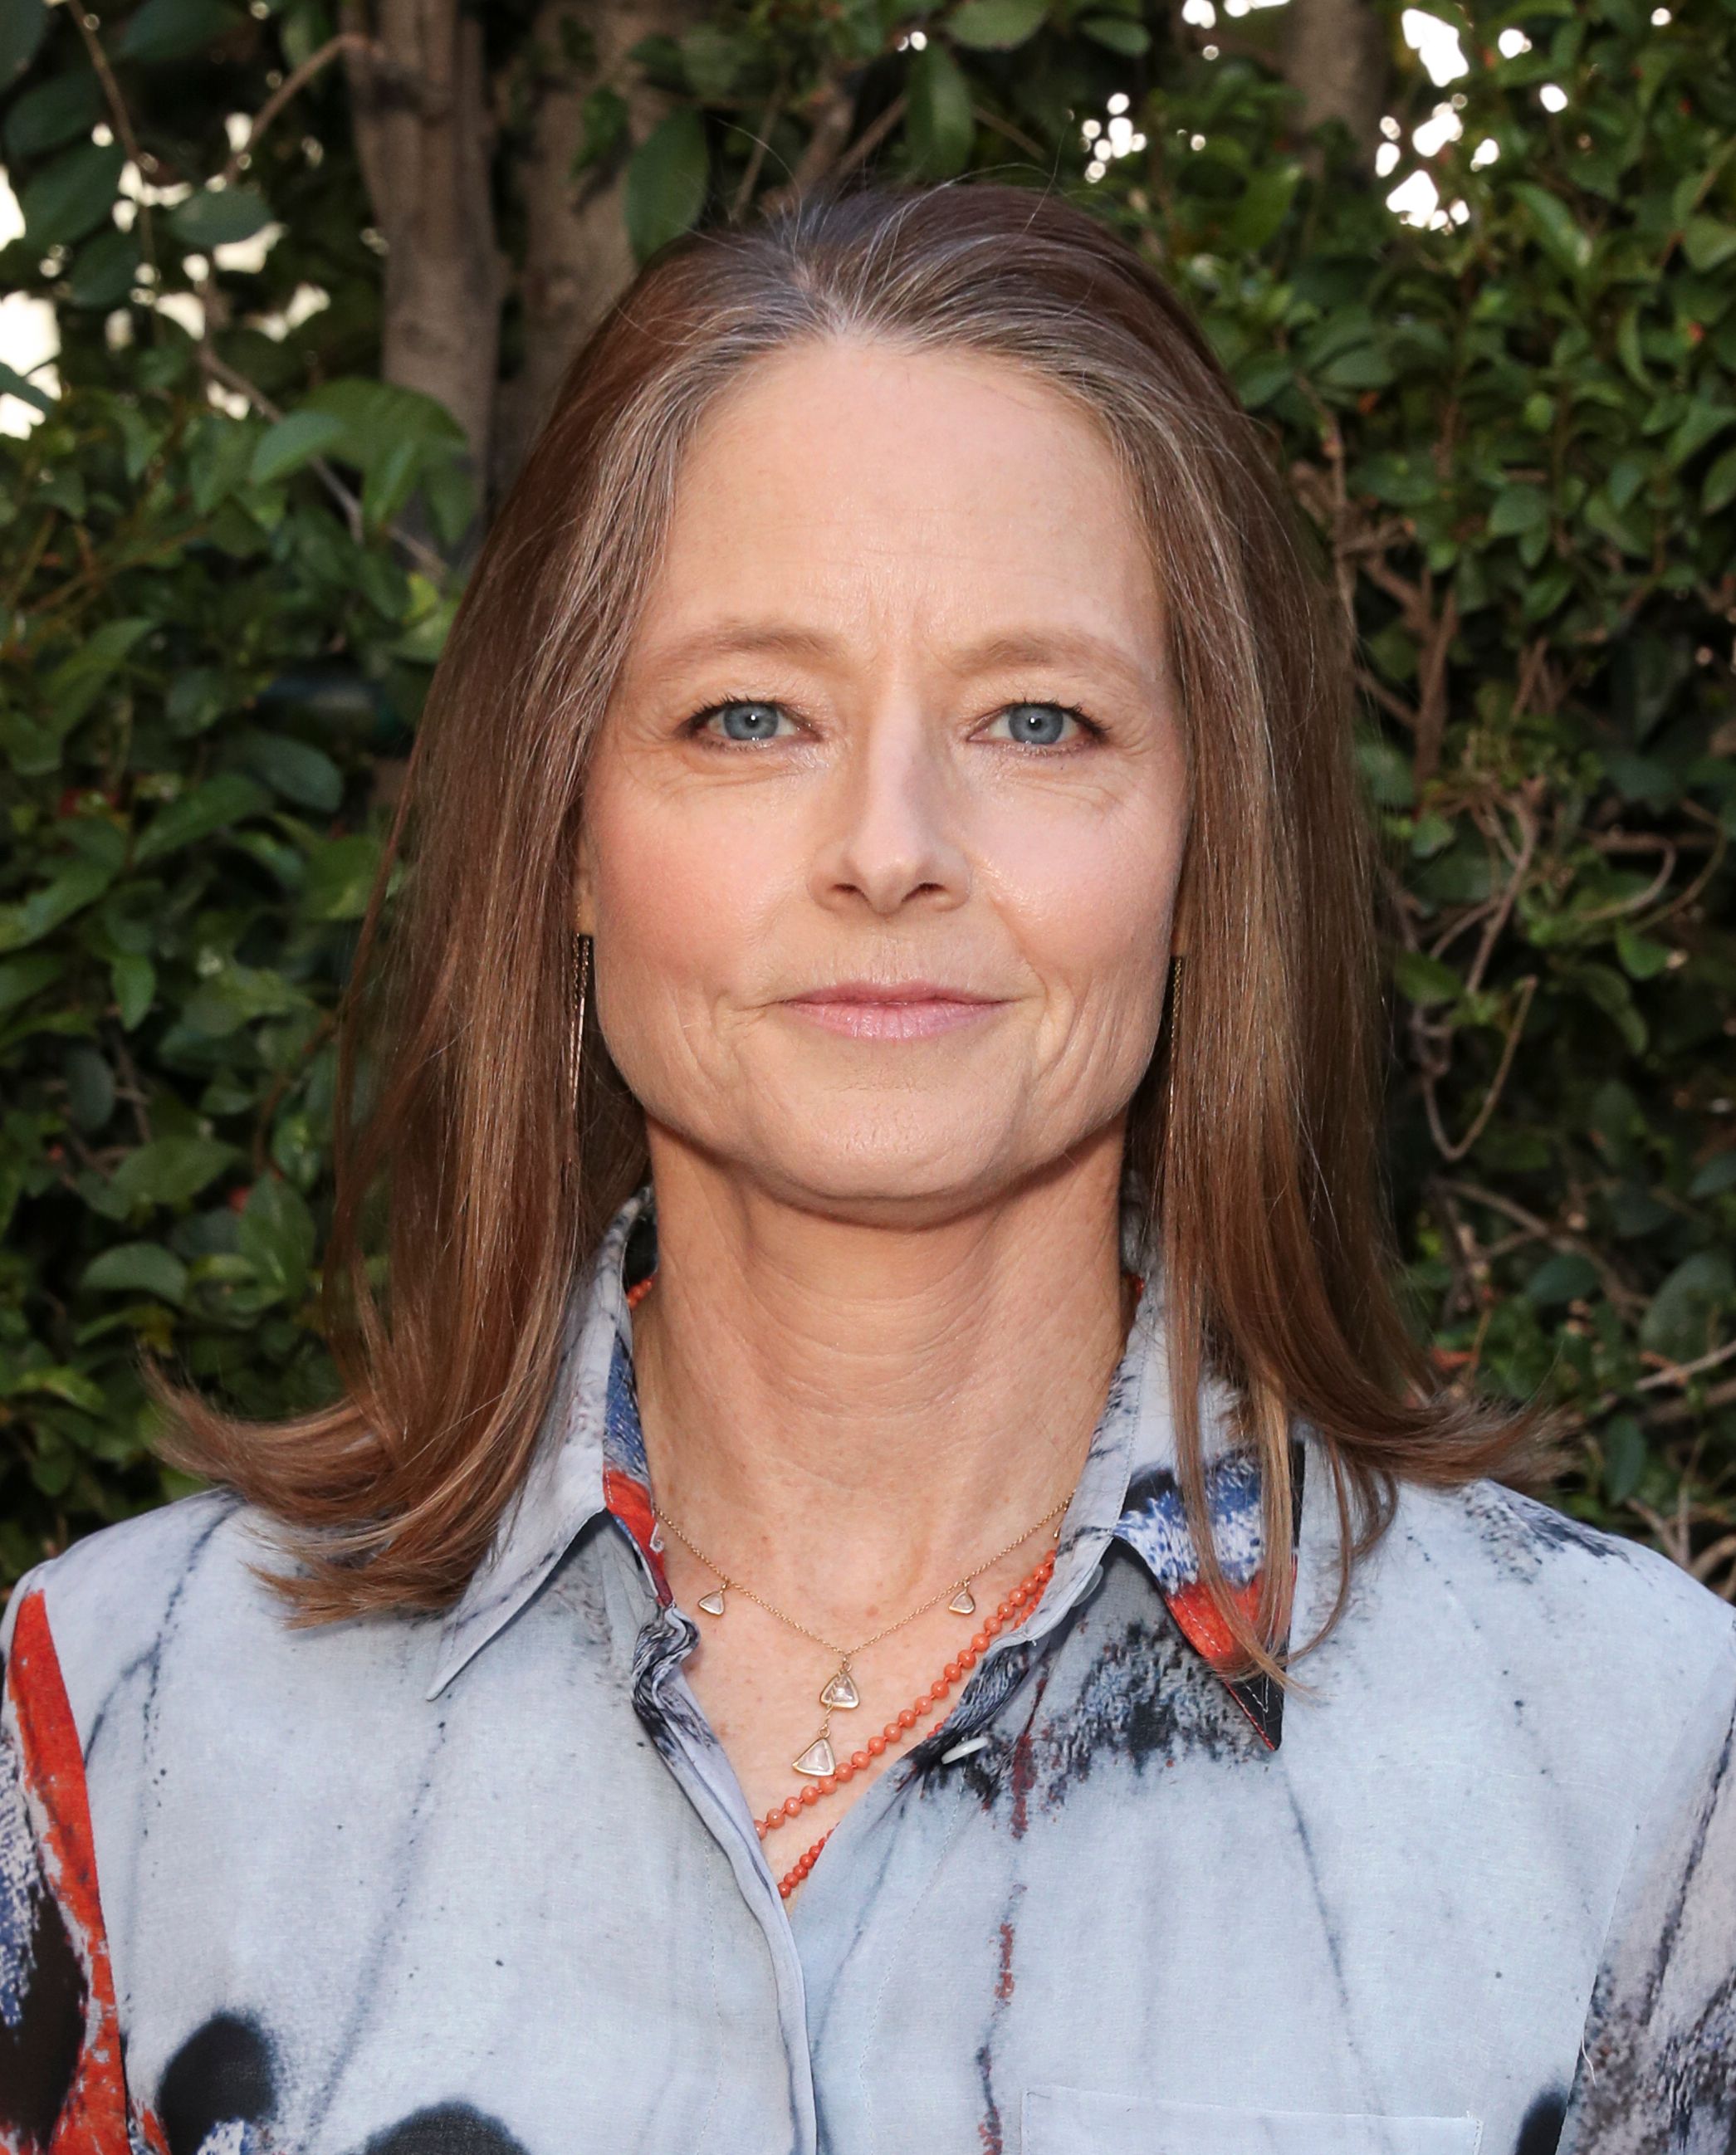 Jodie Foster Has Just One Regret After Five Decades in the Business